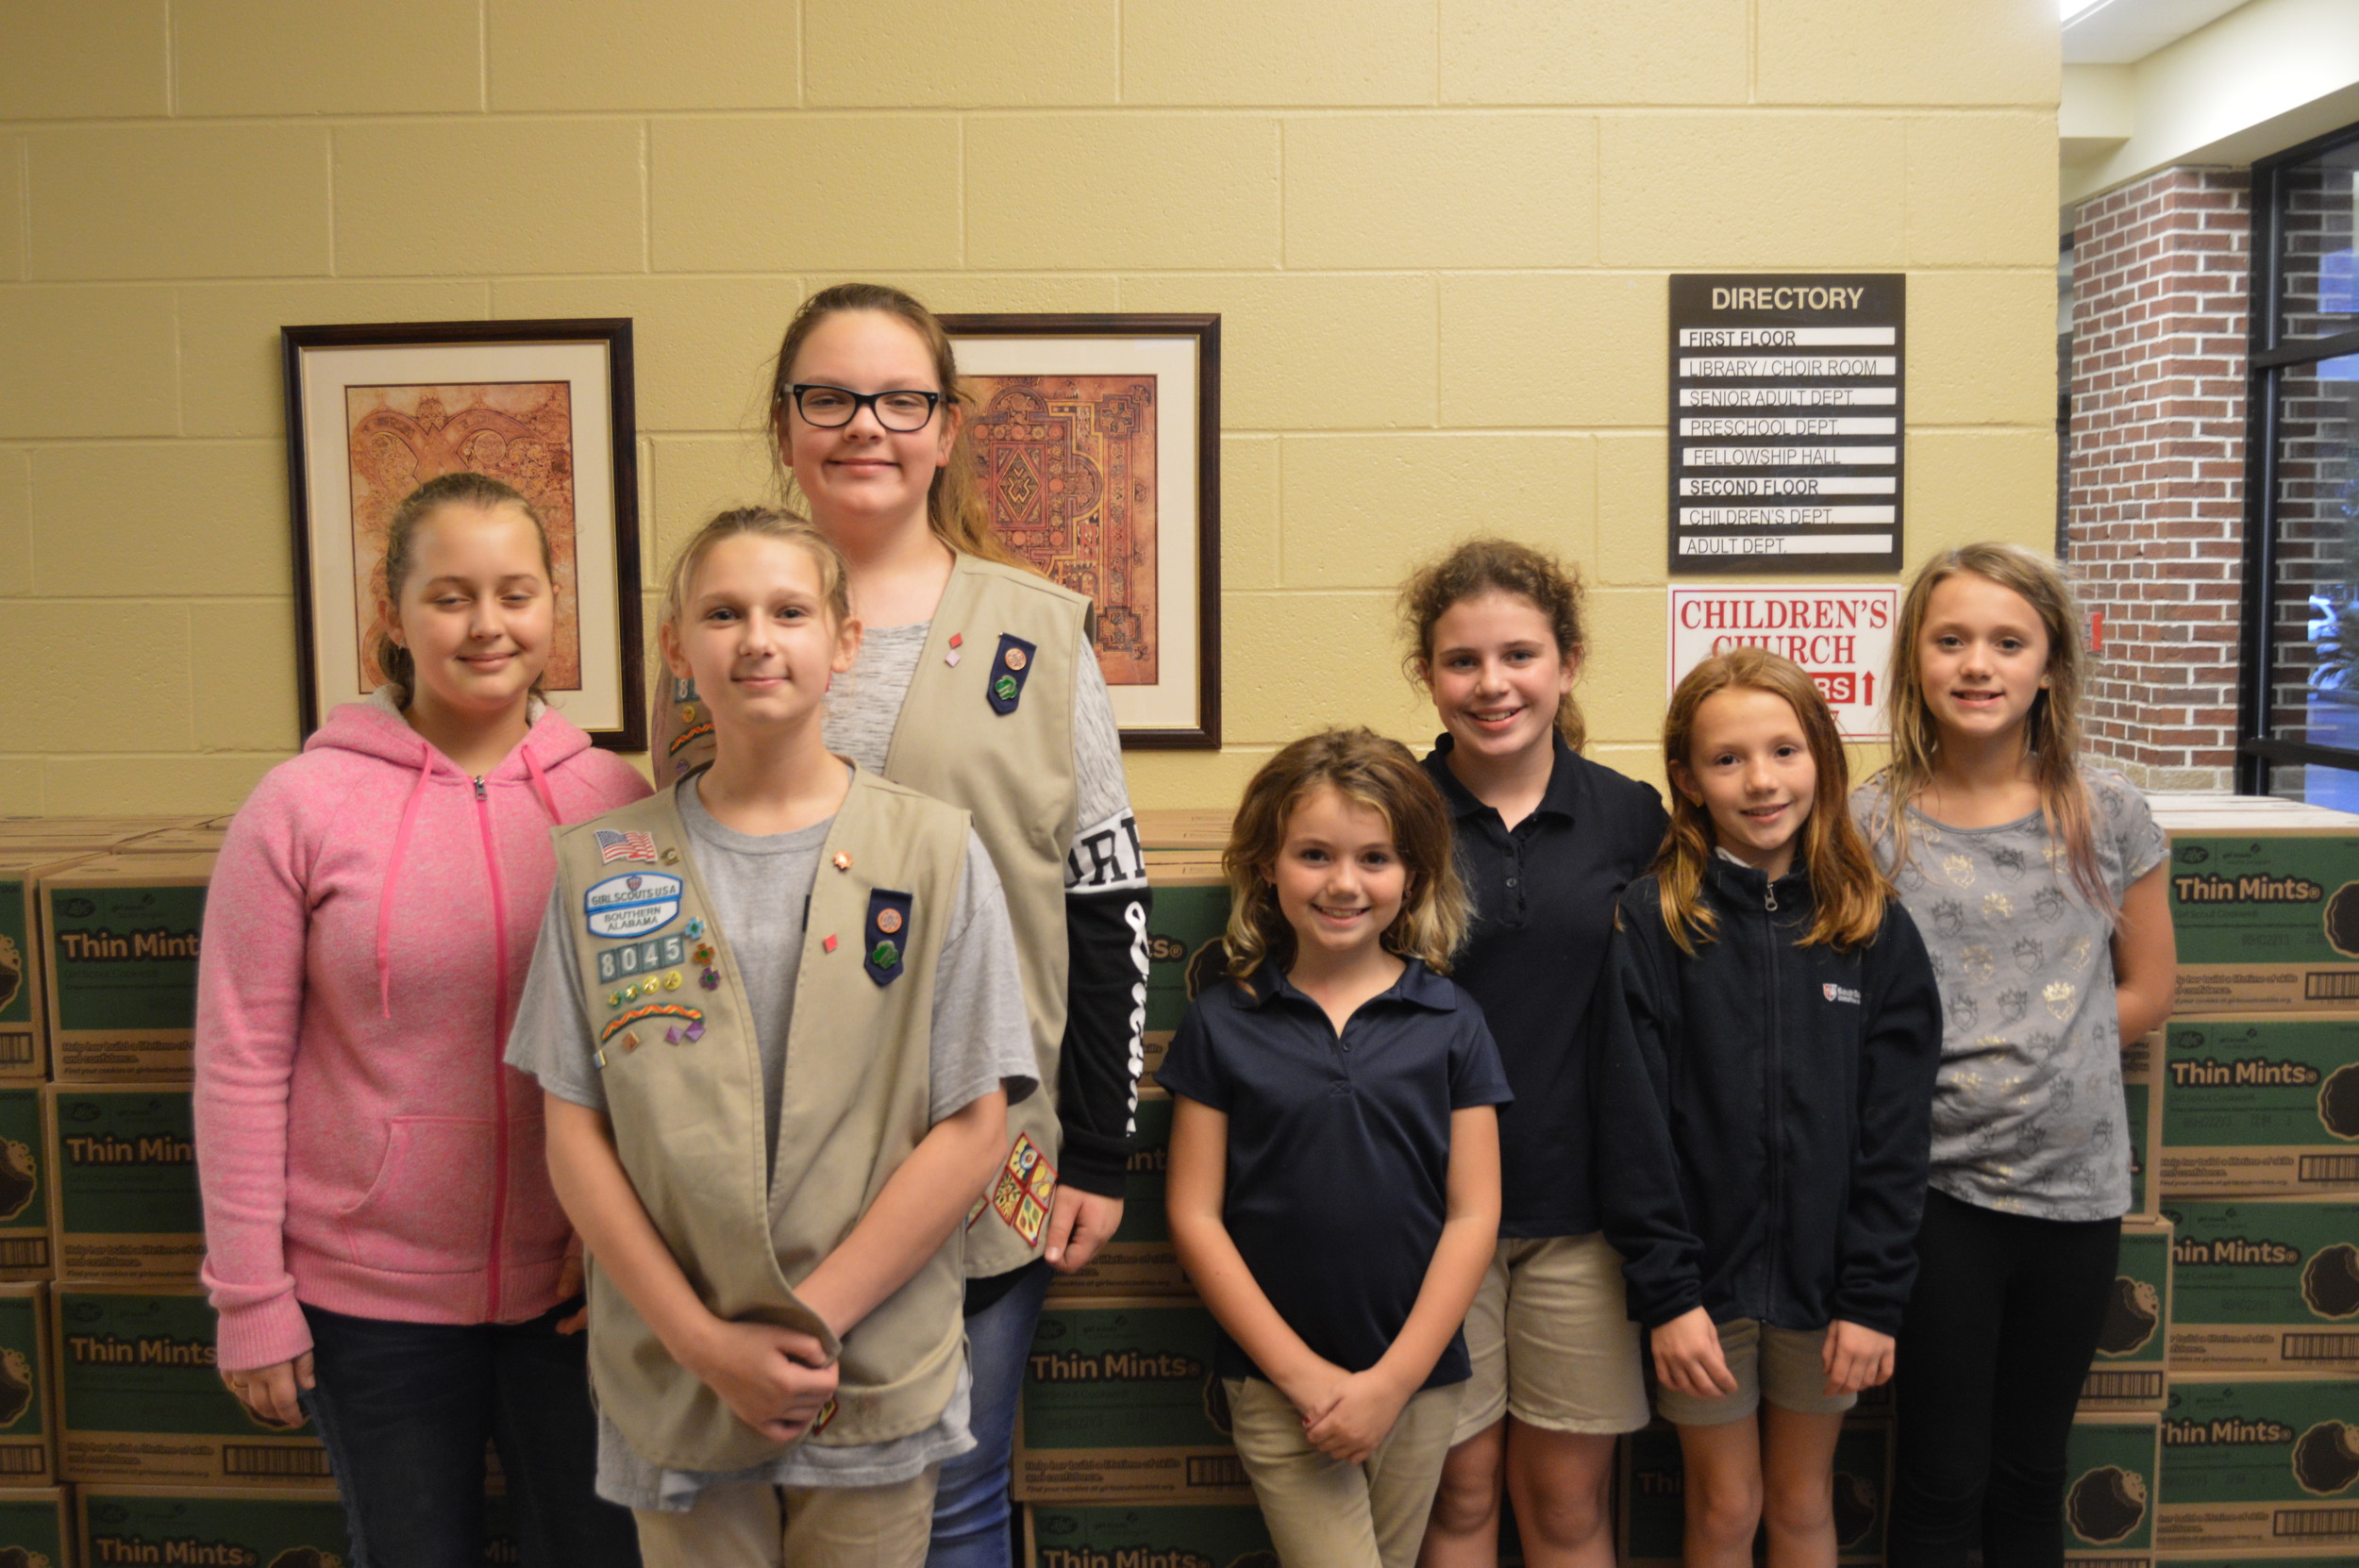 Girl Scouts from the Foley troop help unload cookie boxes from the delivery truck, and are ready to begin selling in their community.